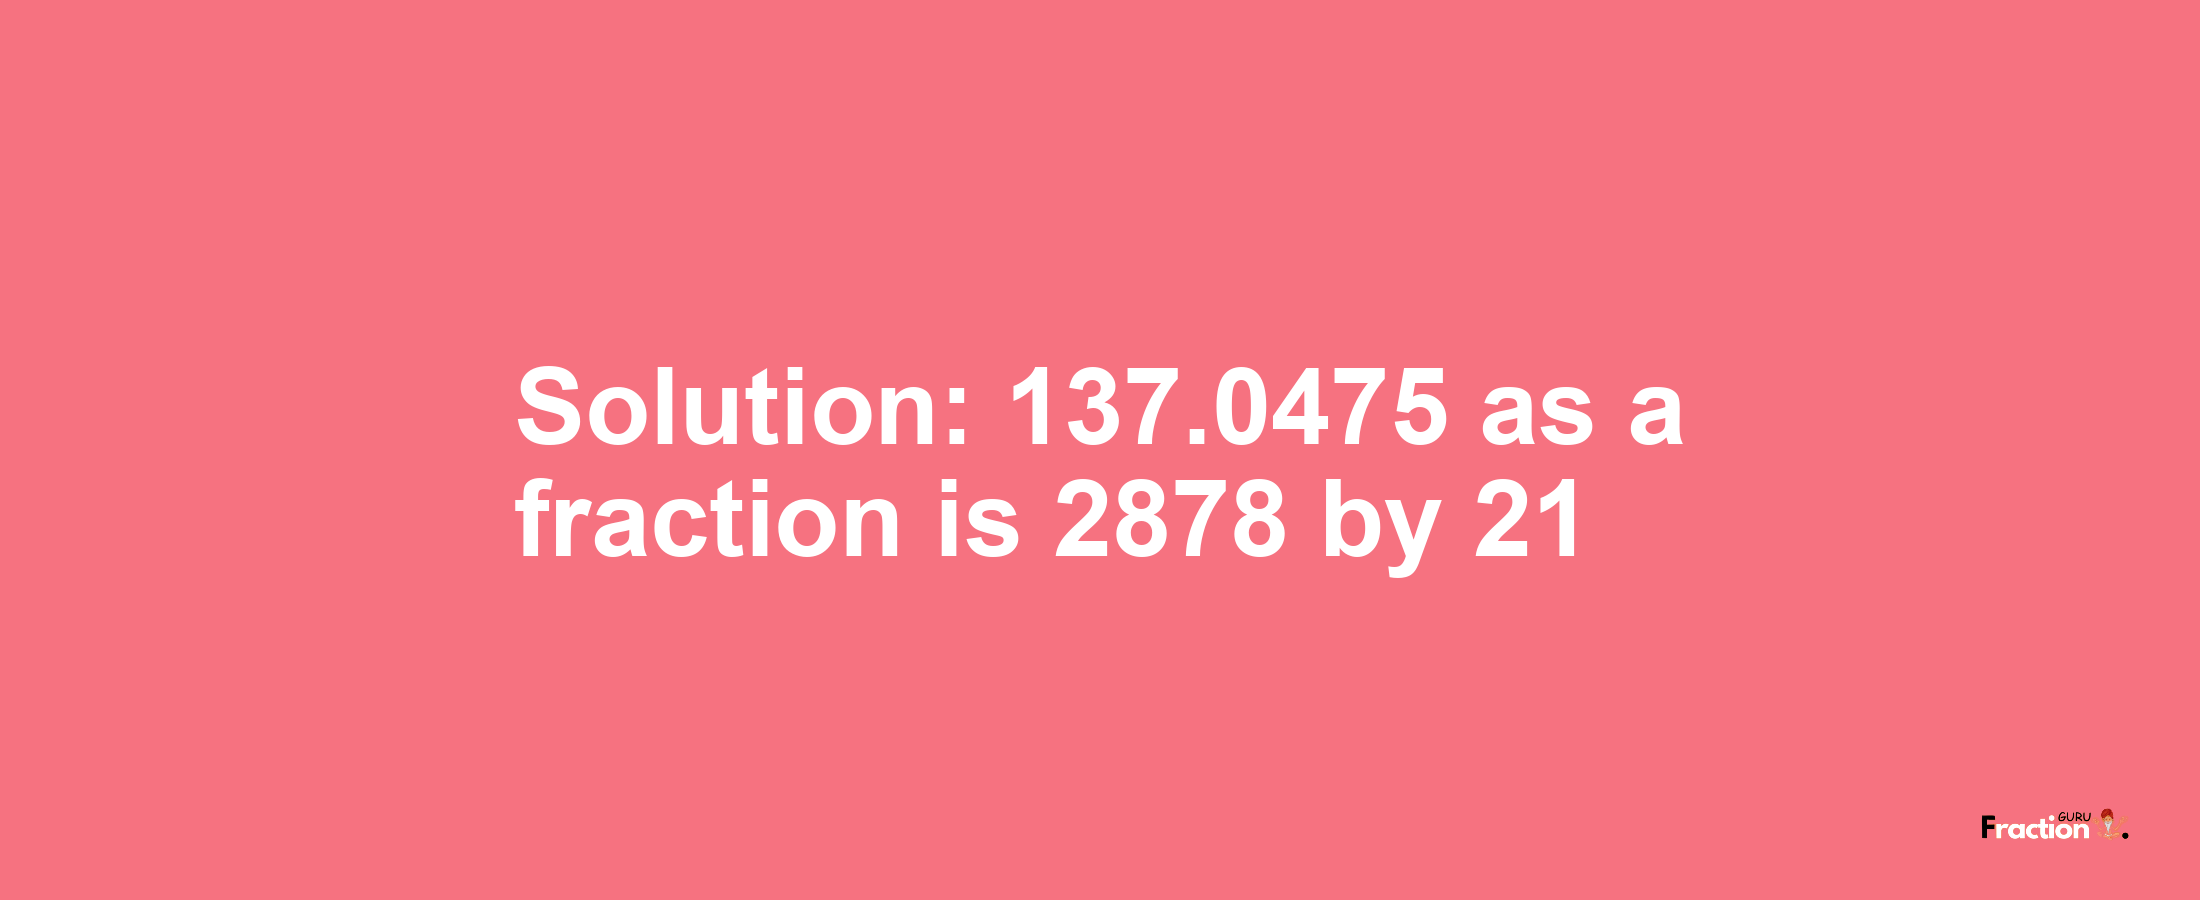 Solution:137.0475 as a fraction is 2878/21